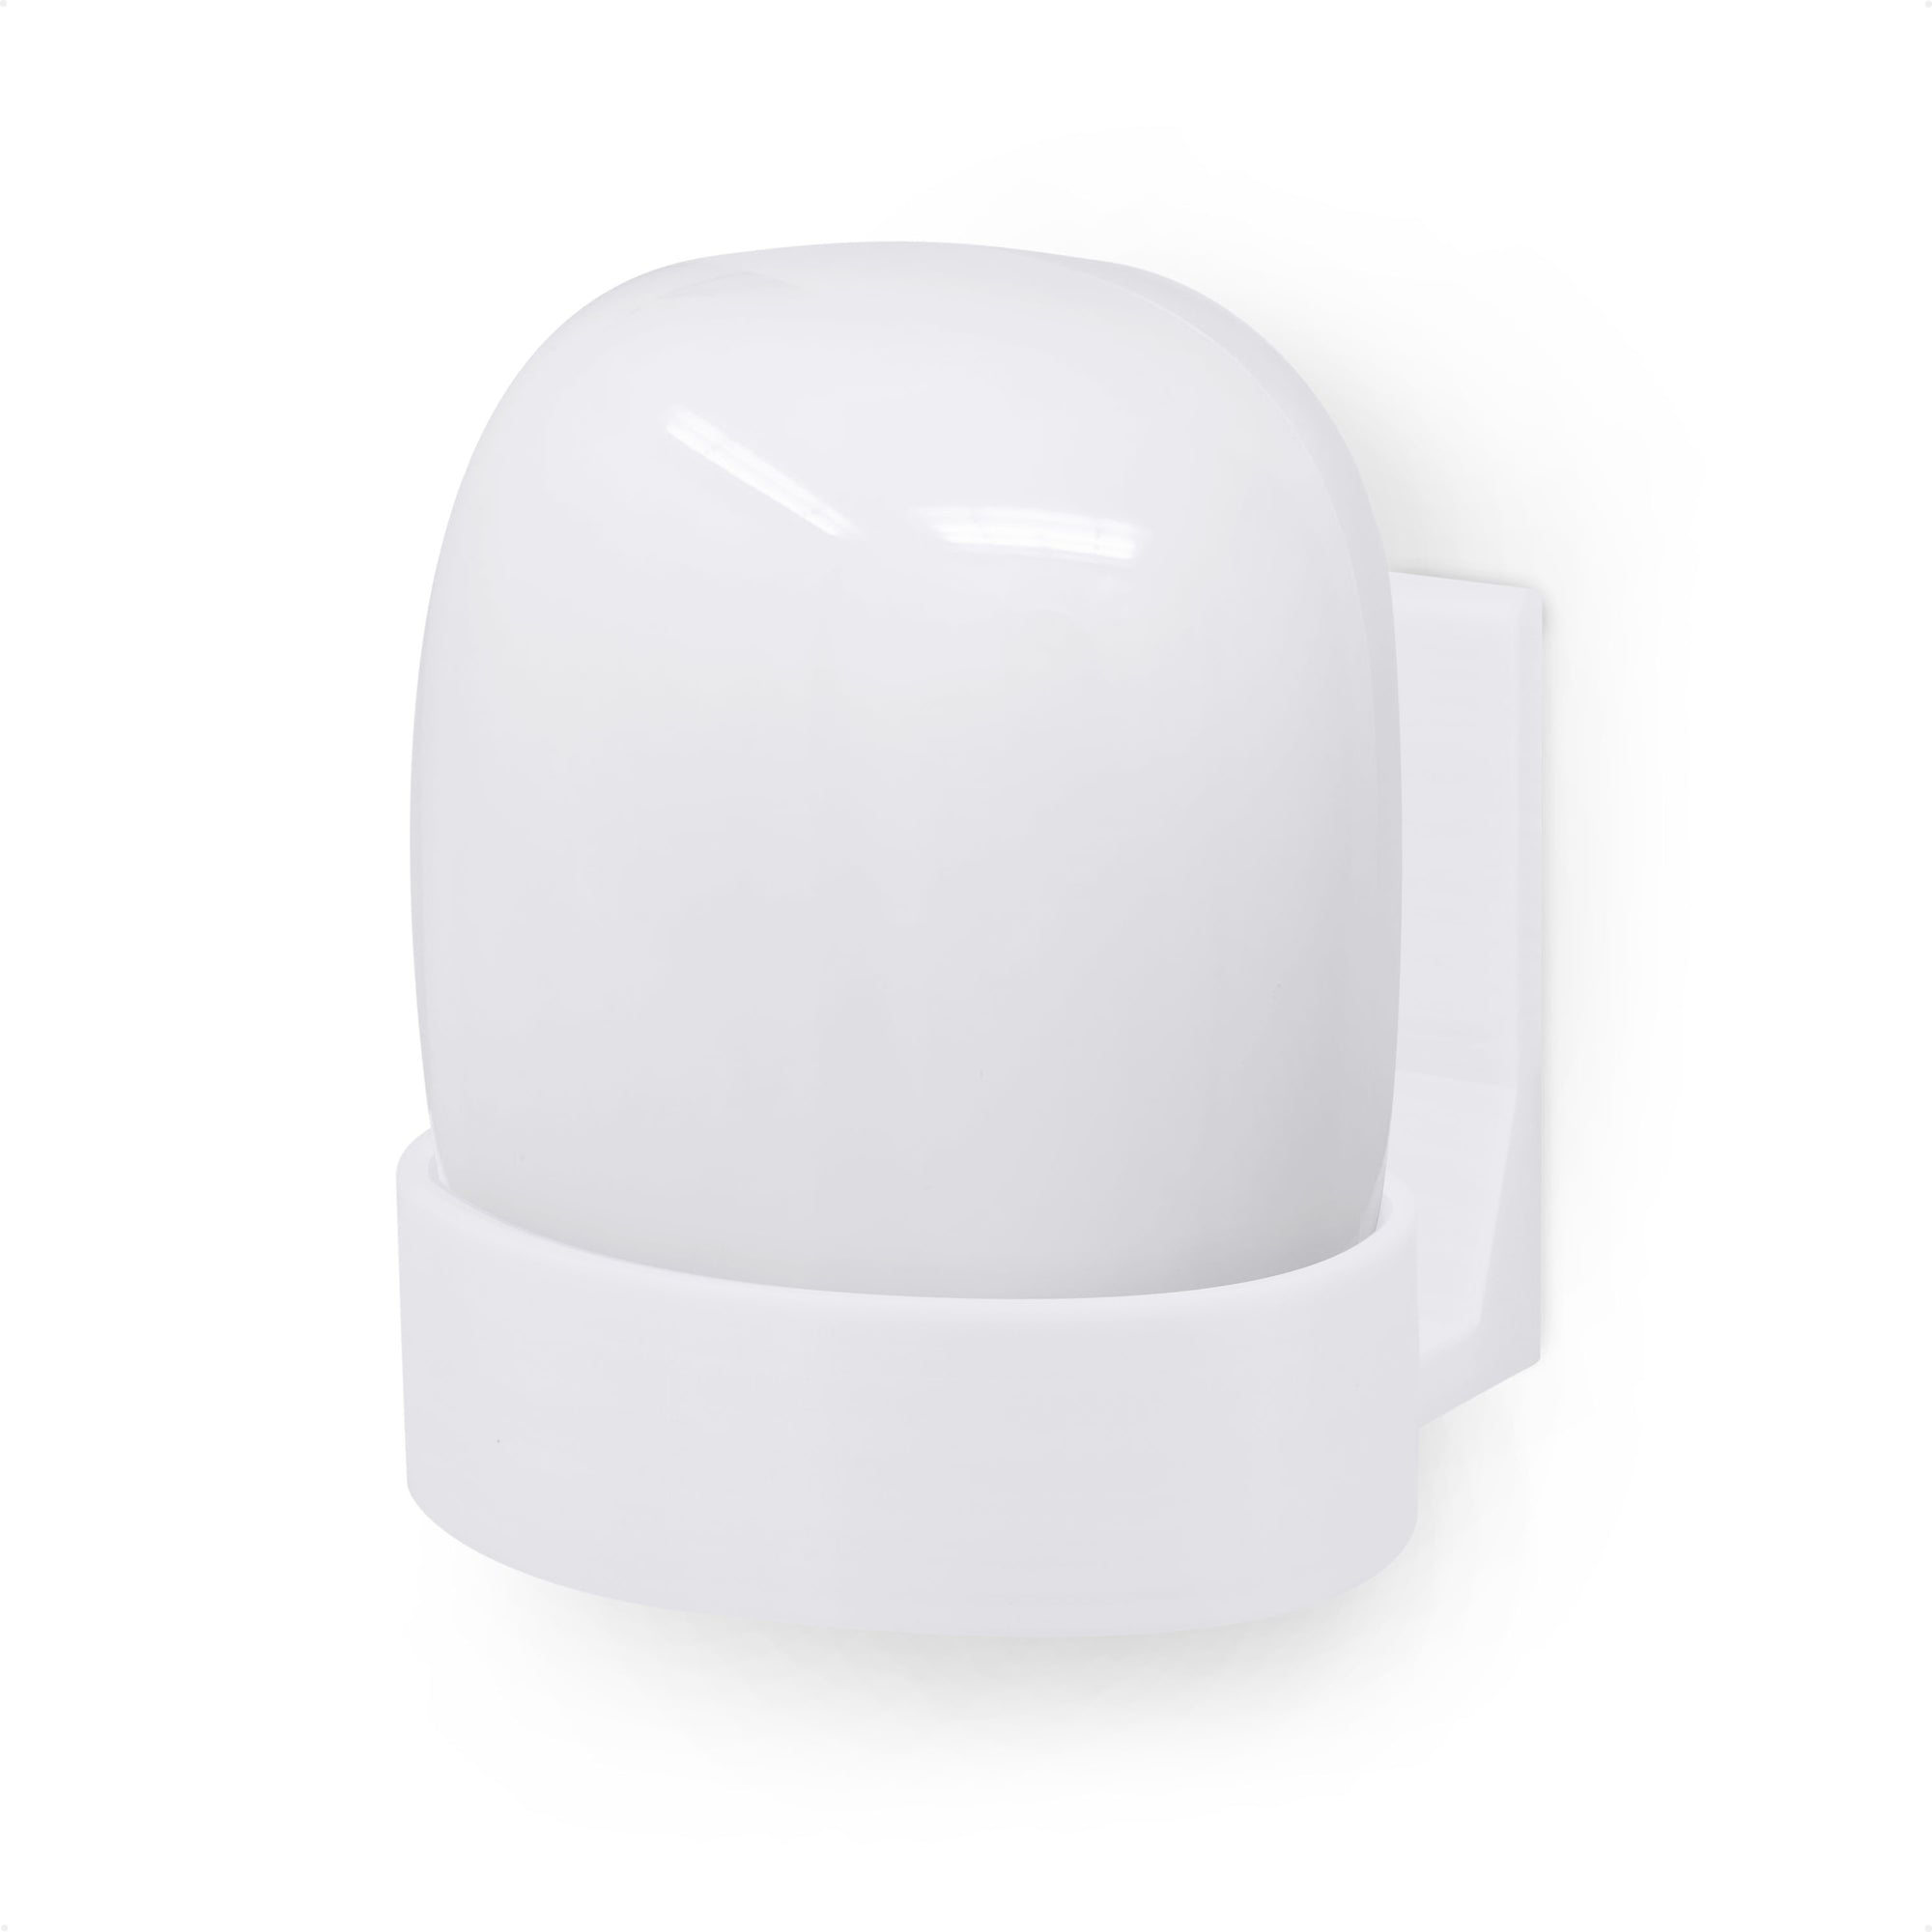 Wall Mount For Google Nest WiFi Pro 6E Mesh Router, Easy to Install Holder Bracket, Reduce Interference & Clutter